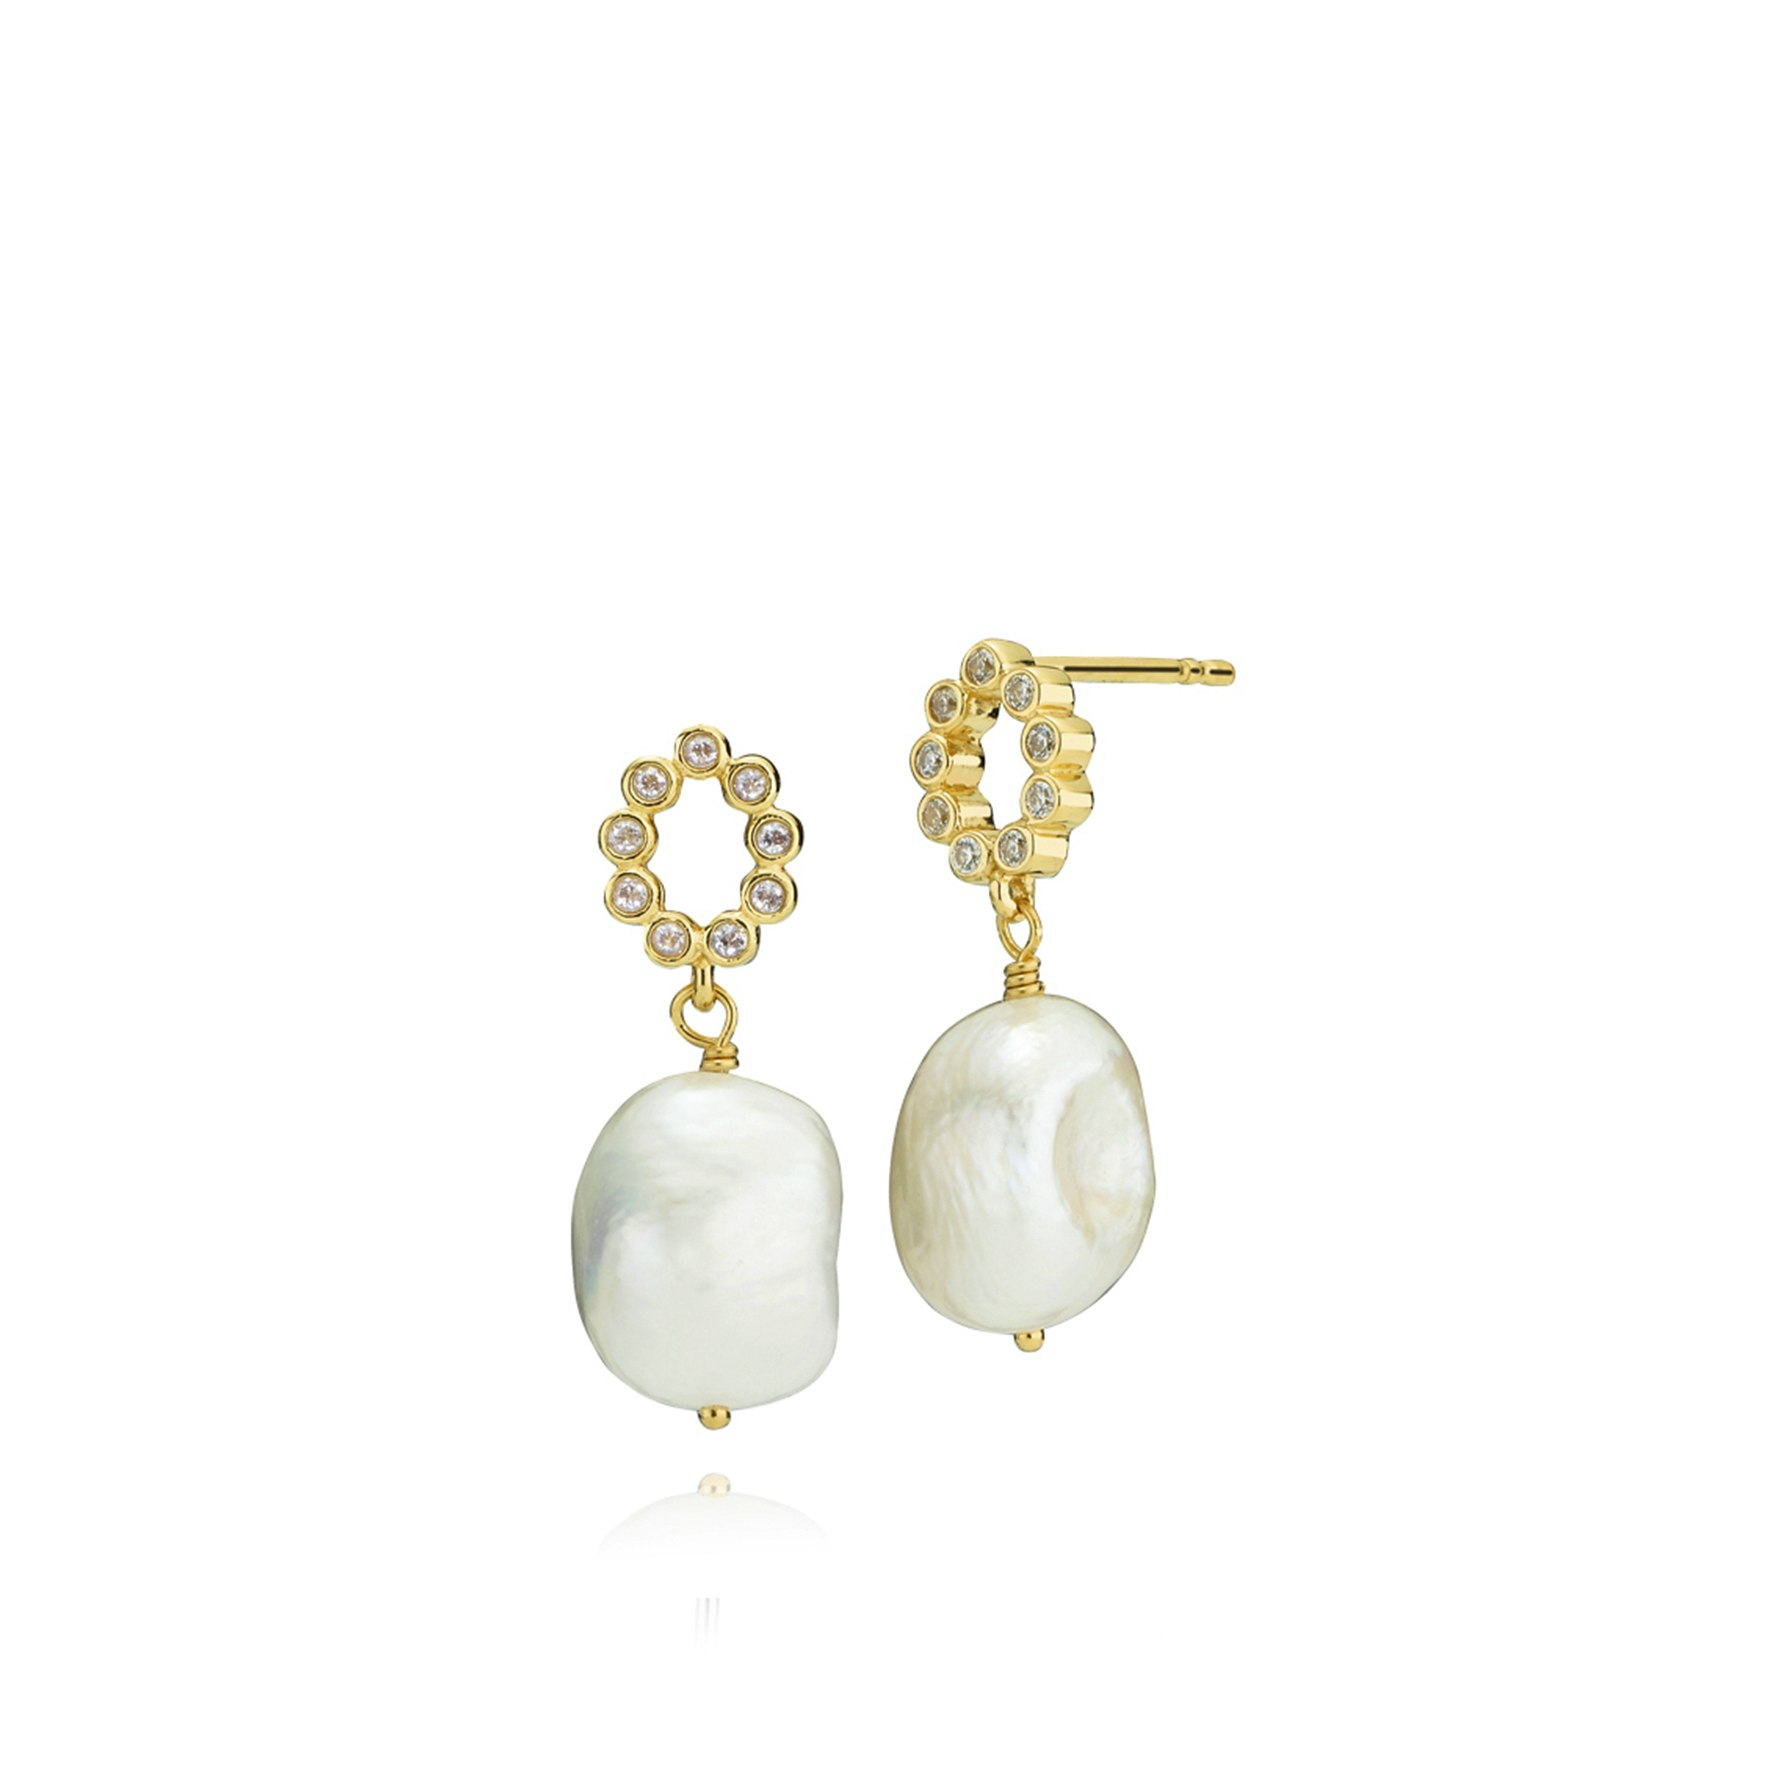 Leonora Earrings With Freshwater Pearls from Izabel Camille in Goldplated Silver Sterling 925